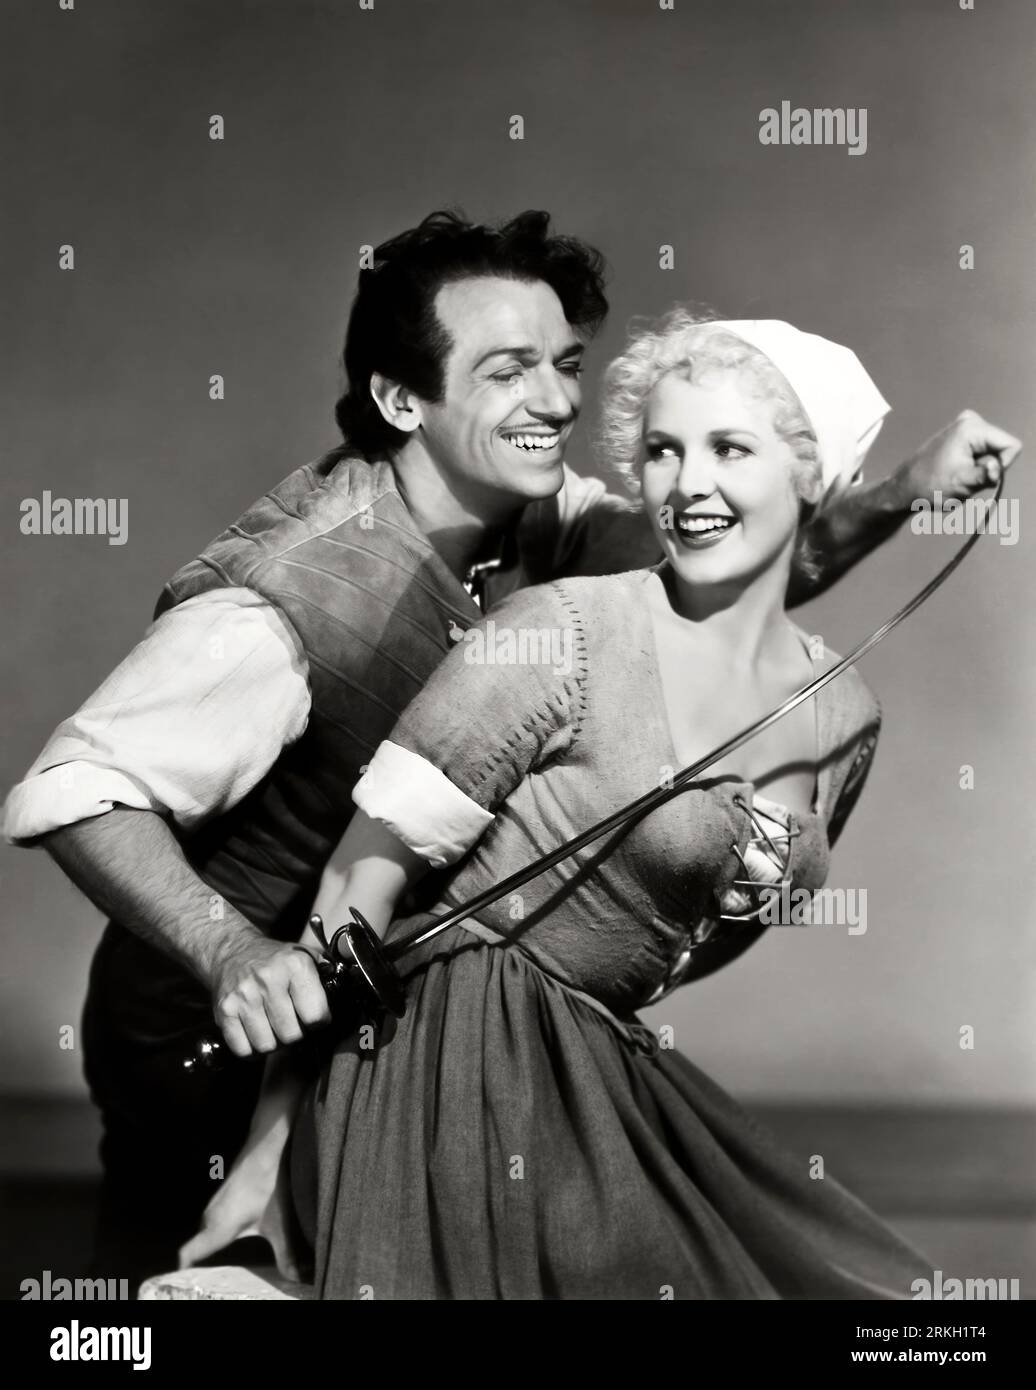 DOUGLAS FAIRBANKS JR. and RITA CORDAY in THE EXILE (1947), directed by MAX OPHÜLS. Credit: FAIRBANKS CO/UNIVERSAL / Album Stock Photo